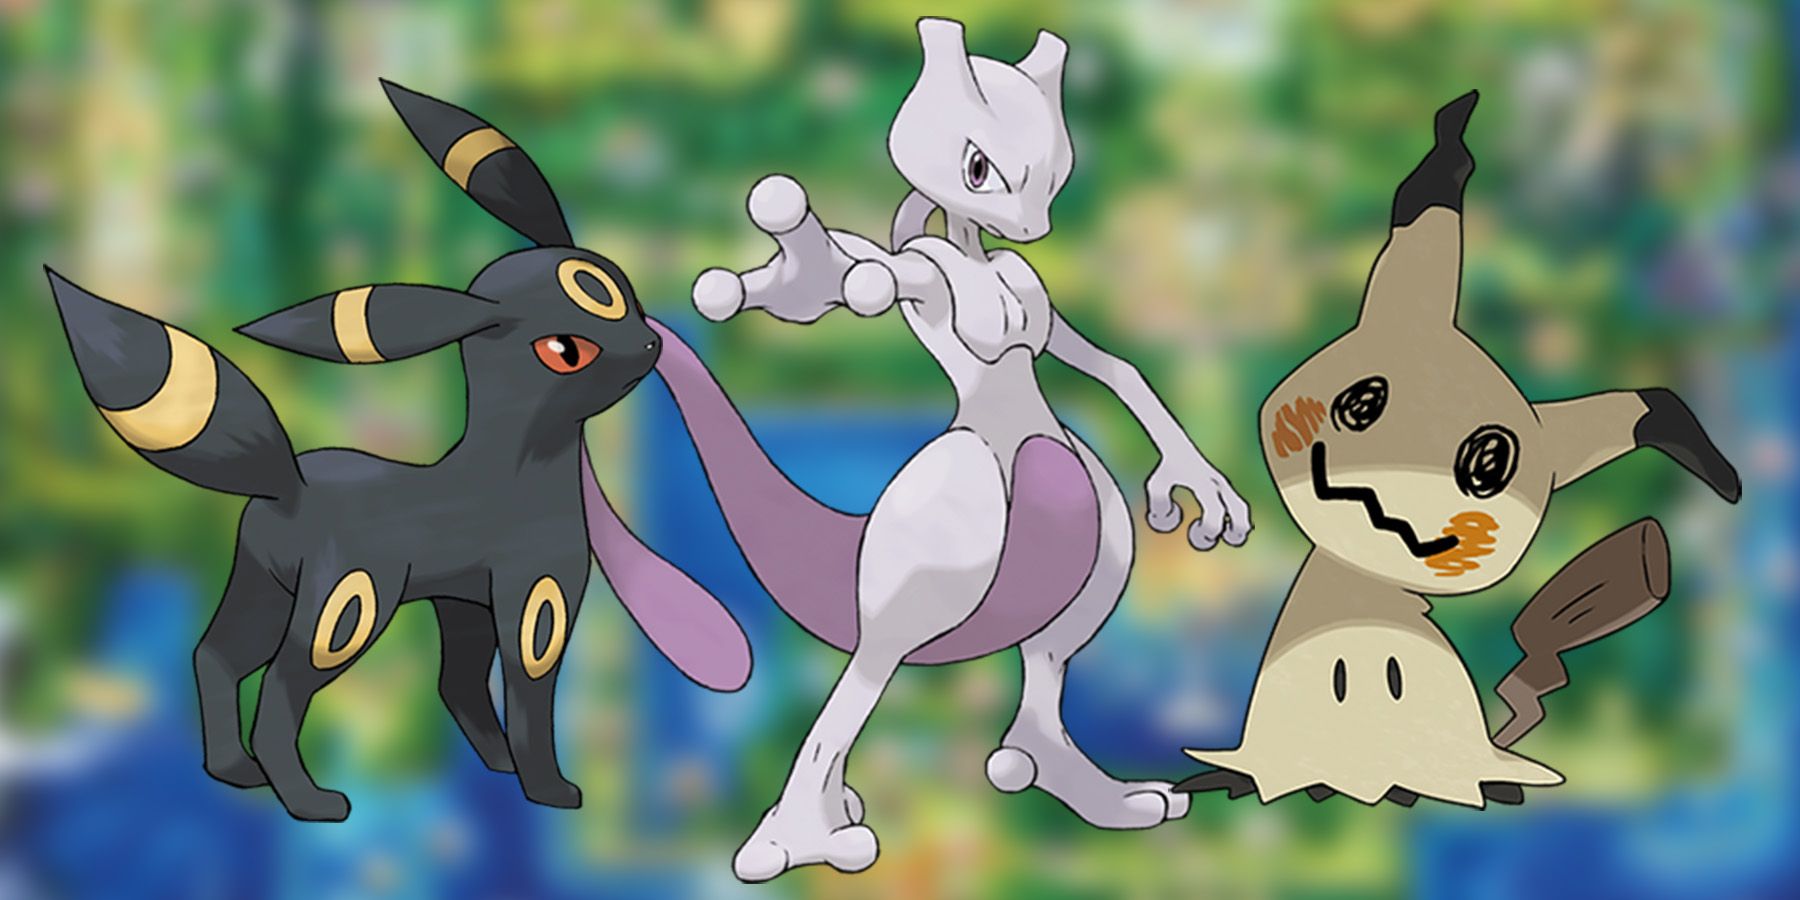 Umbreon Mewtwo and Mimikyu in front of blurred Kanto map